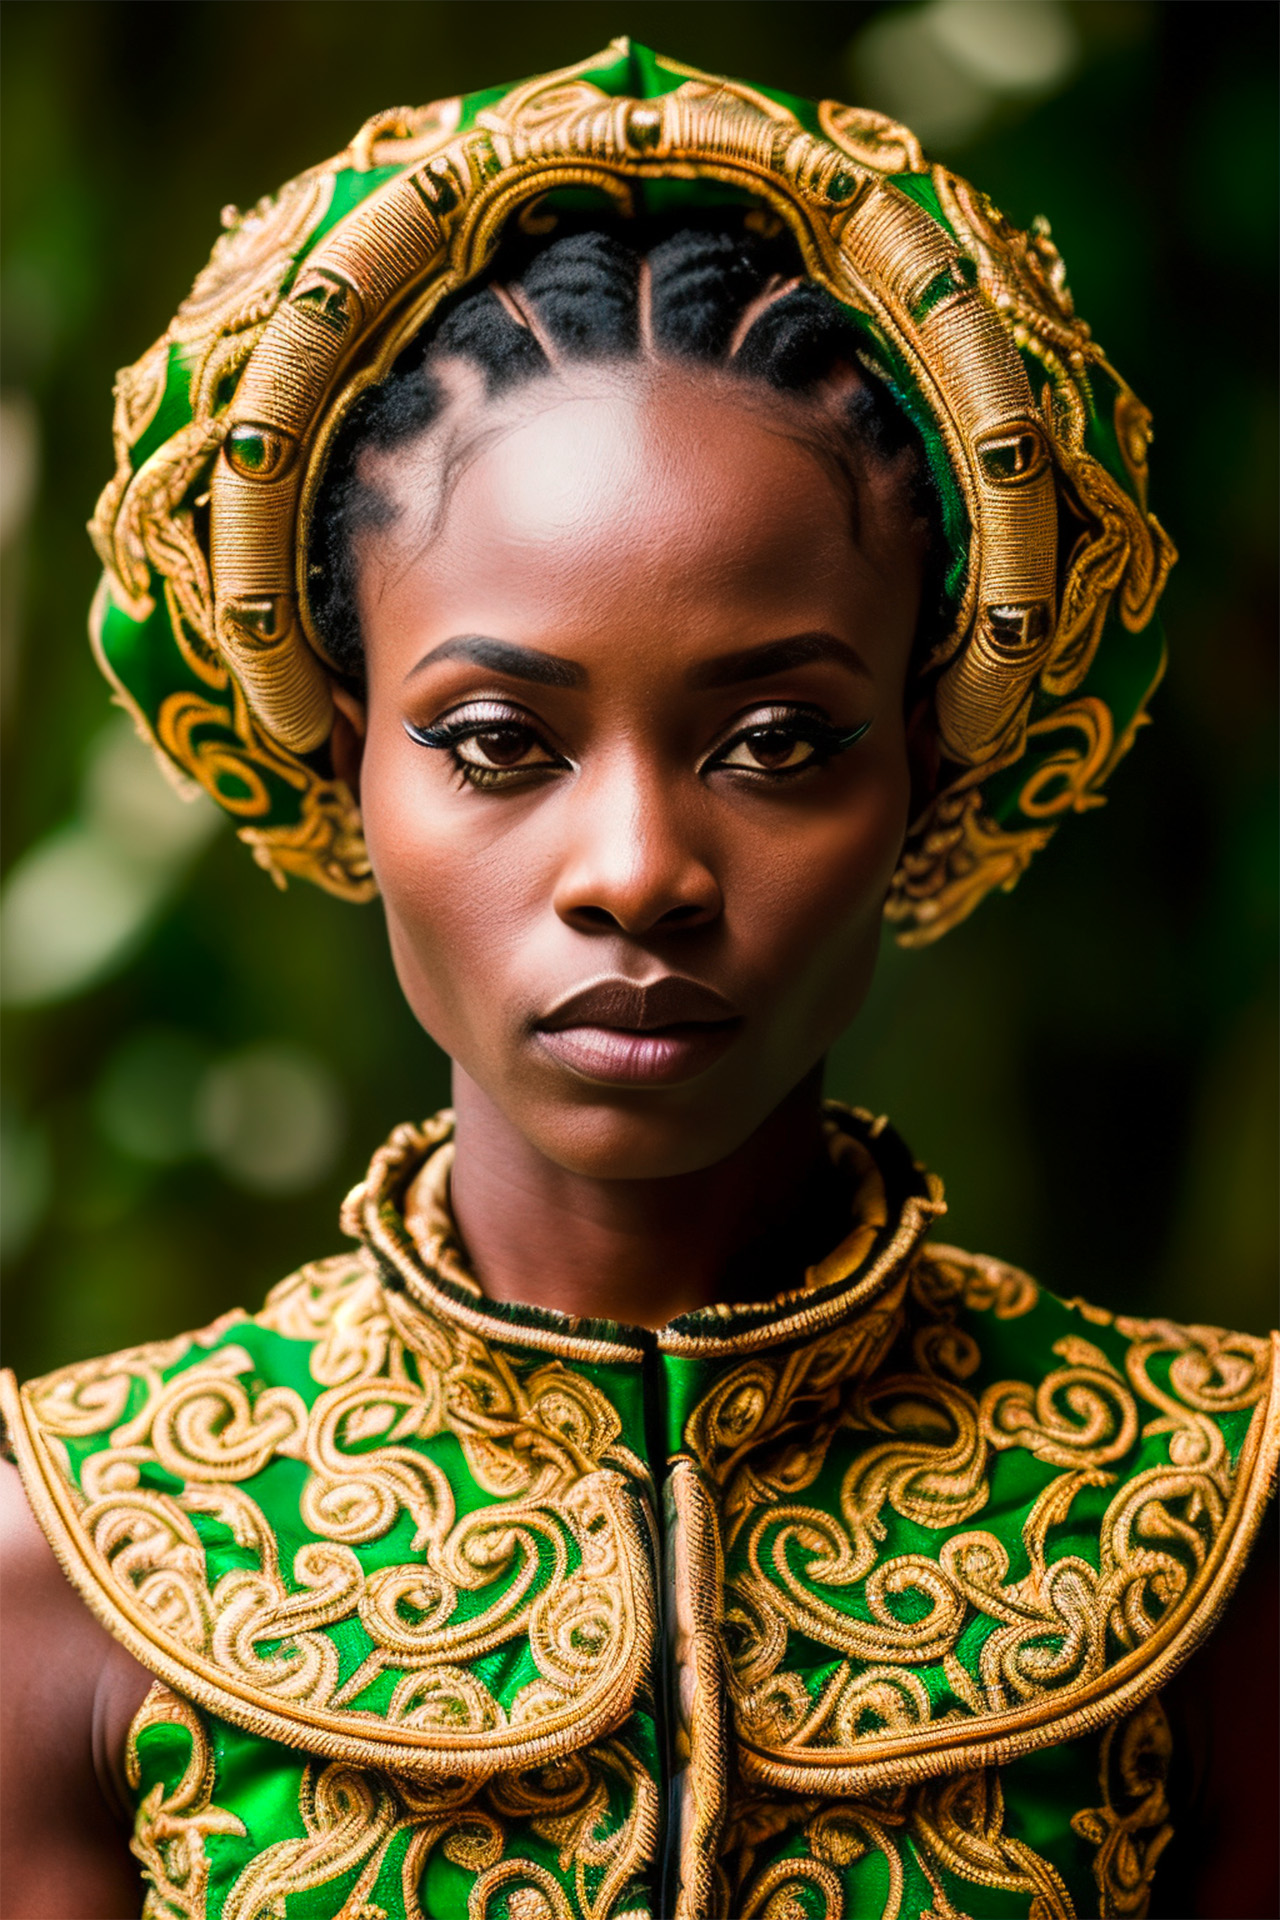 00002-3121680217-RAW photo, (highly detailed skin_1.2), (frontal_1.2) , (head tilted to the side_1.2) photo, Congolese (DRC), elegance, Sorry, ri